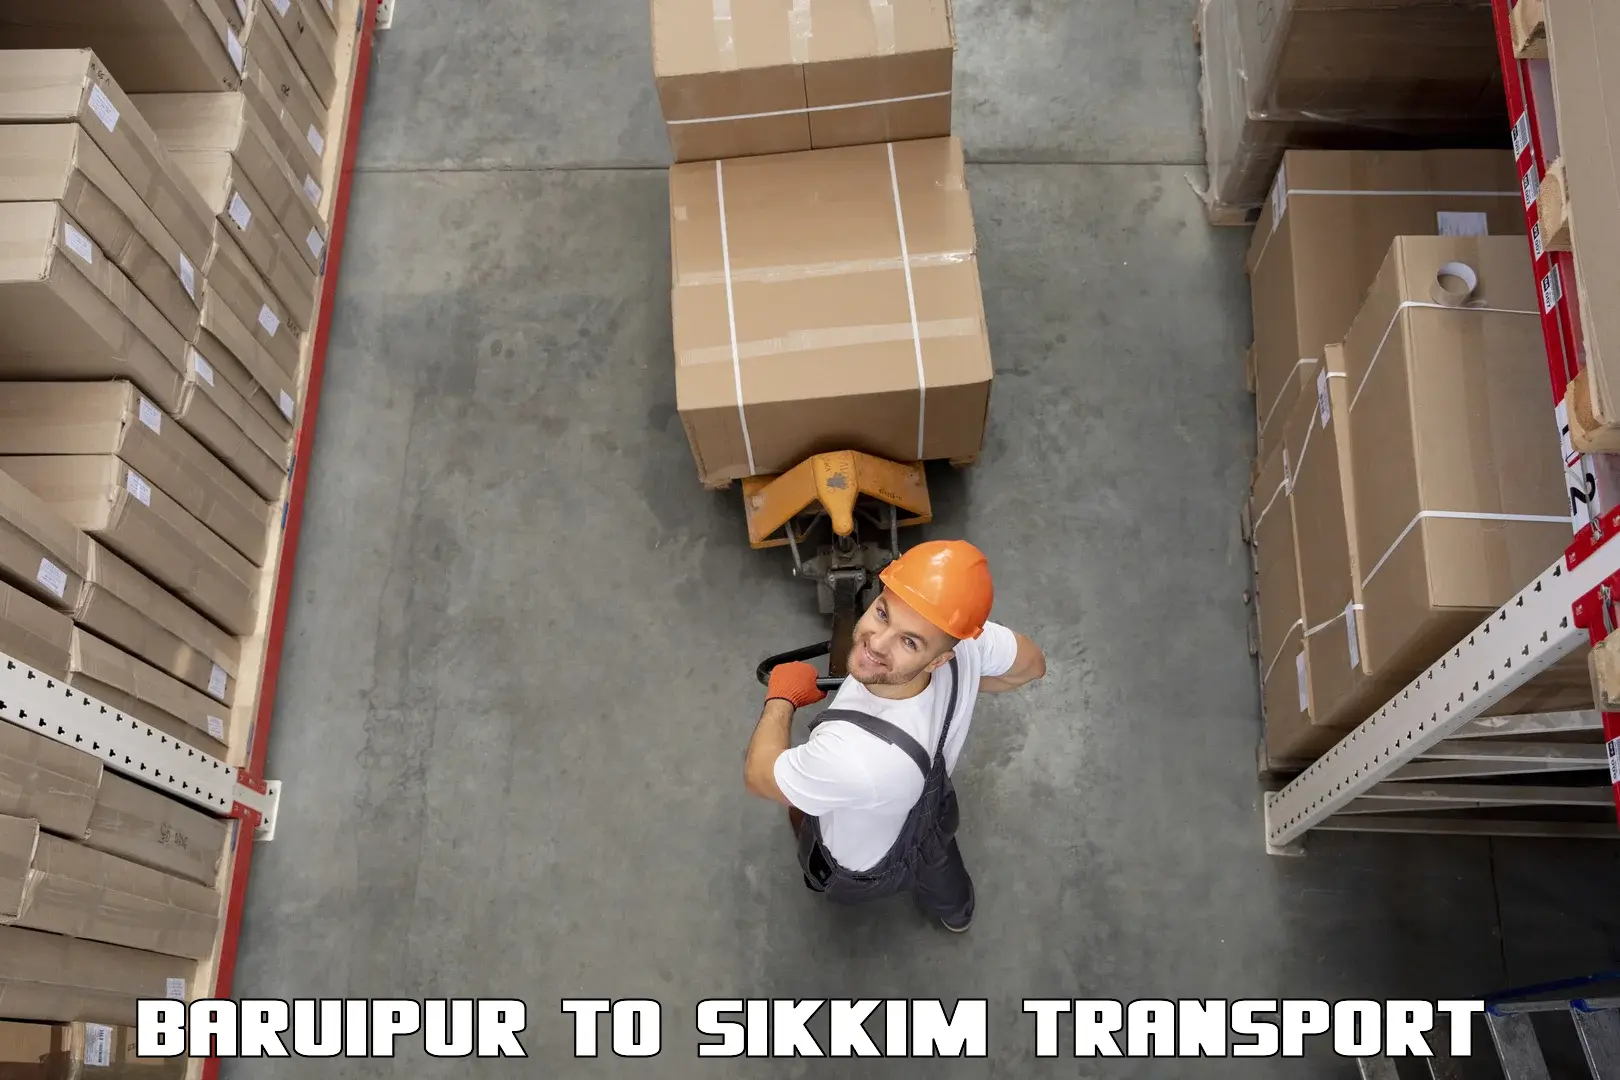 Truck transport companies in India Baruipur to Sikkim